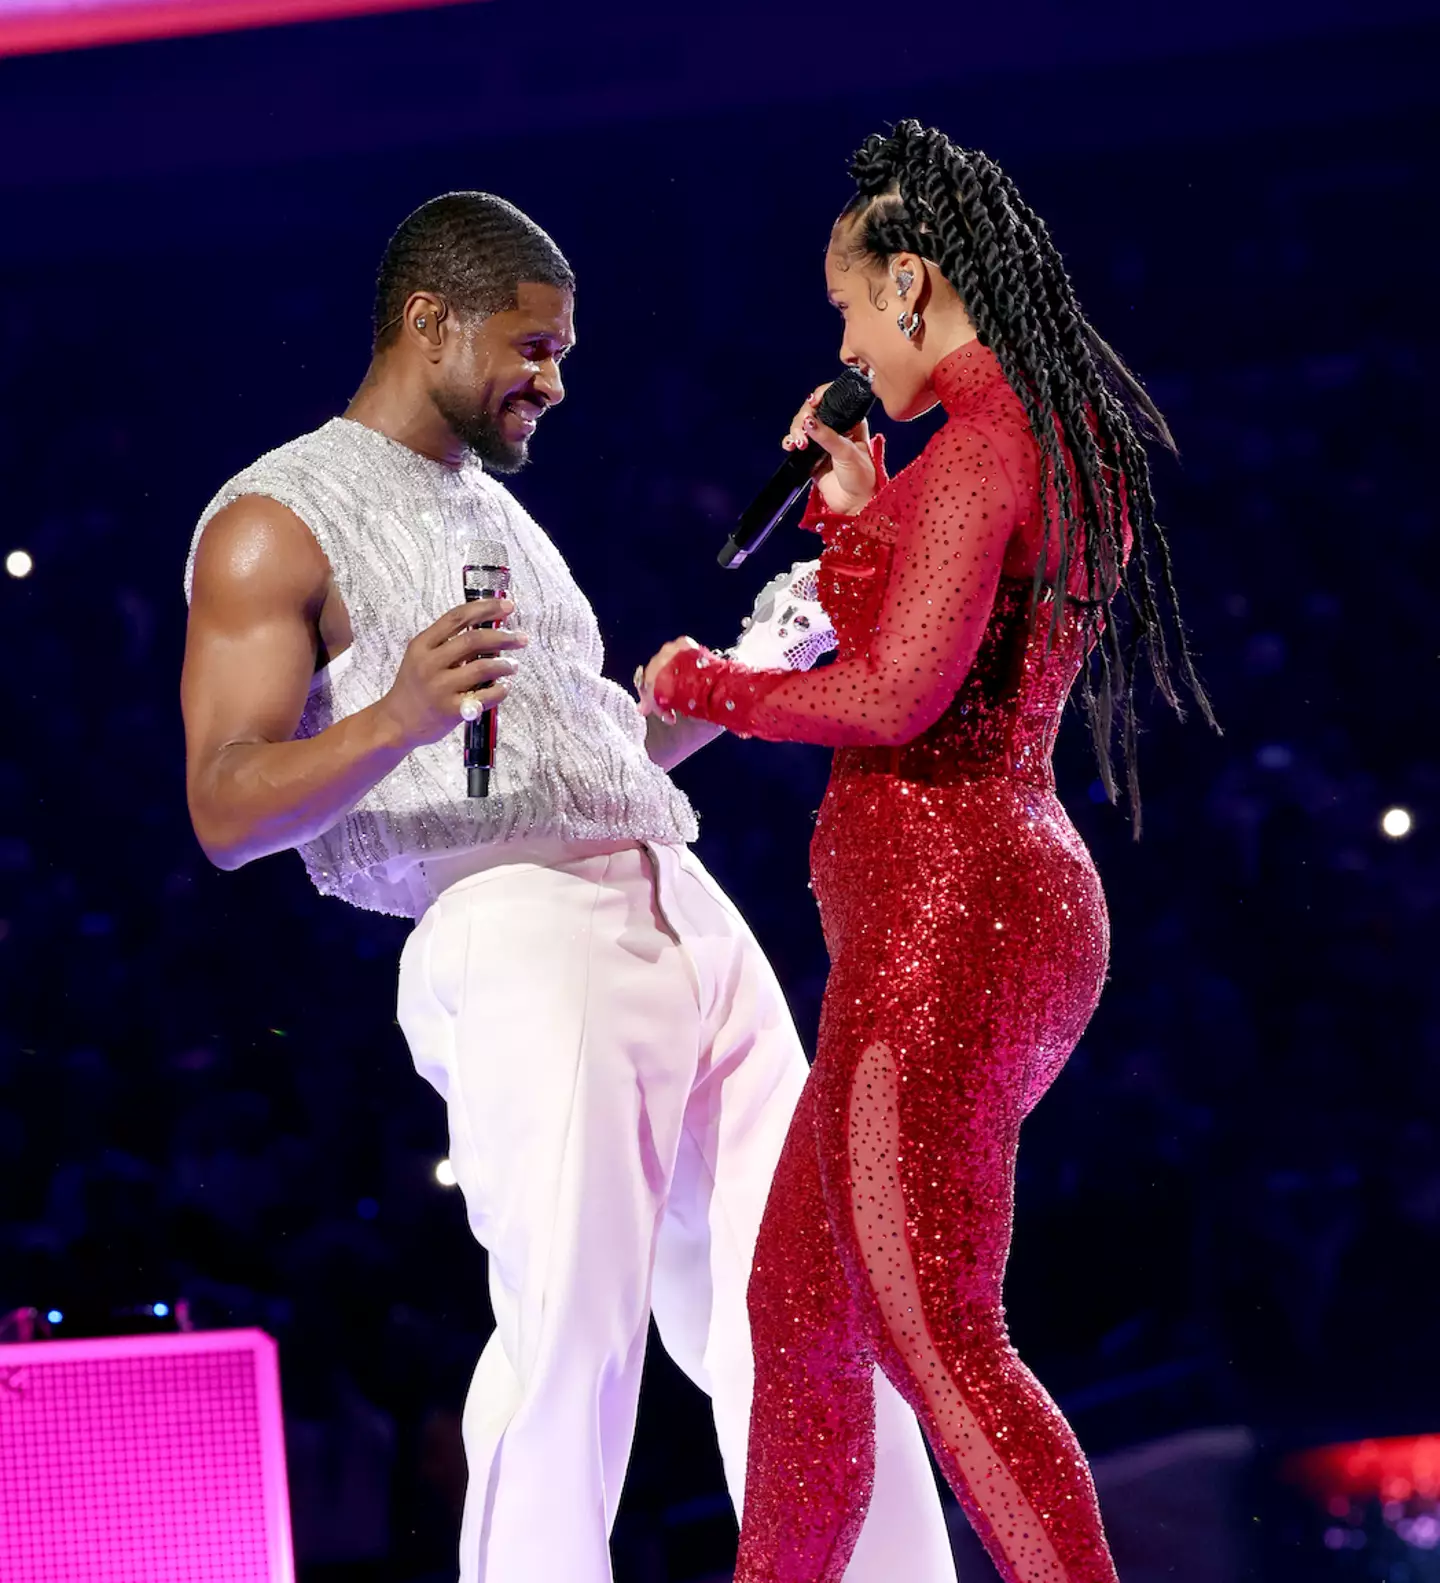 Usher was seen getting mighty close while performing with Alicia Keys.